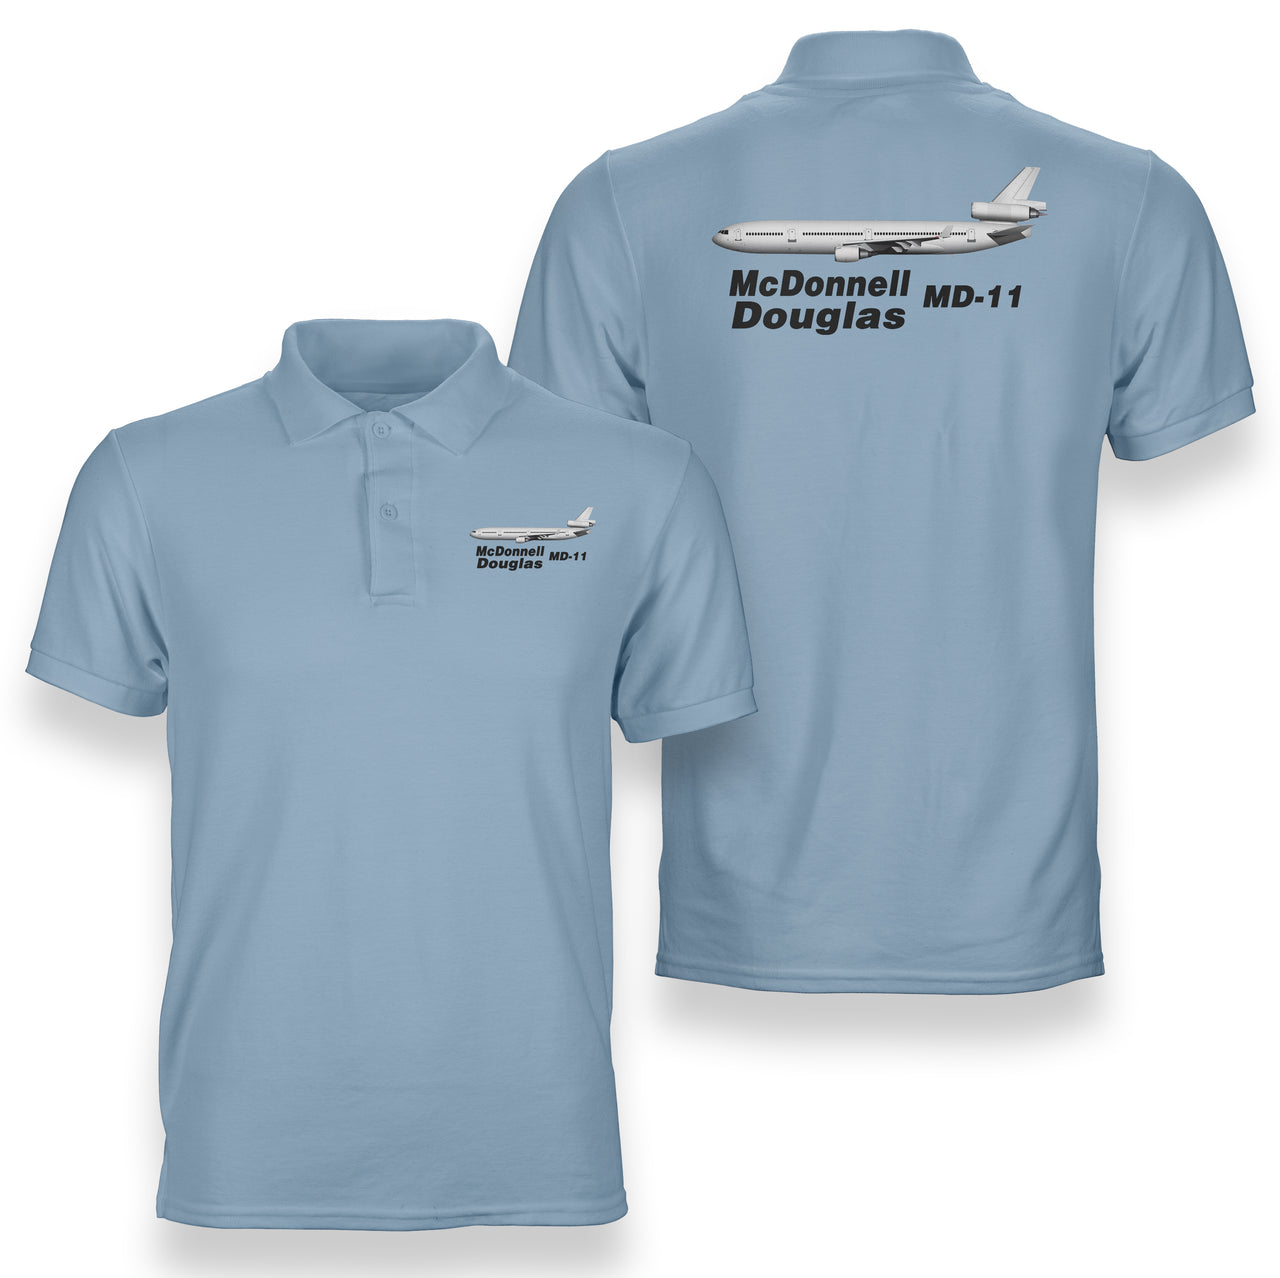 The McDonnell Douglas MD-11 Designed Double Side Polo T-Shirts